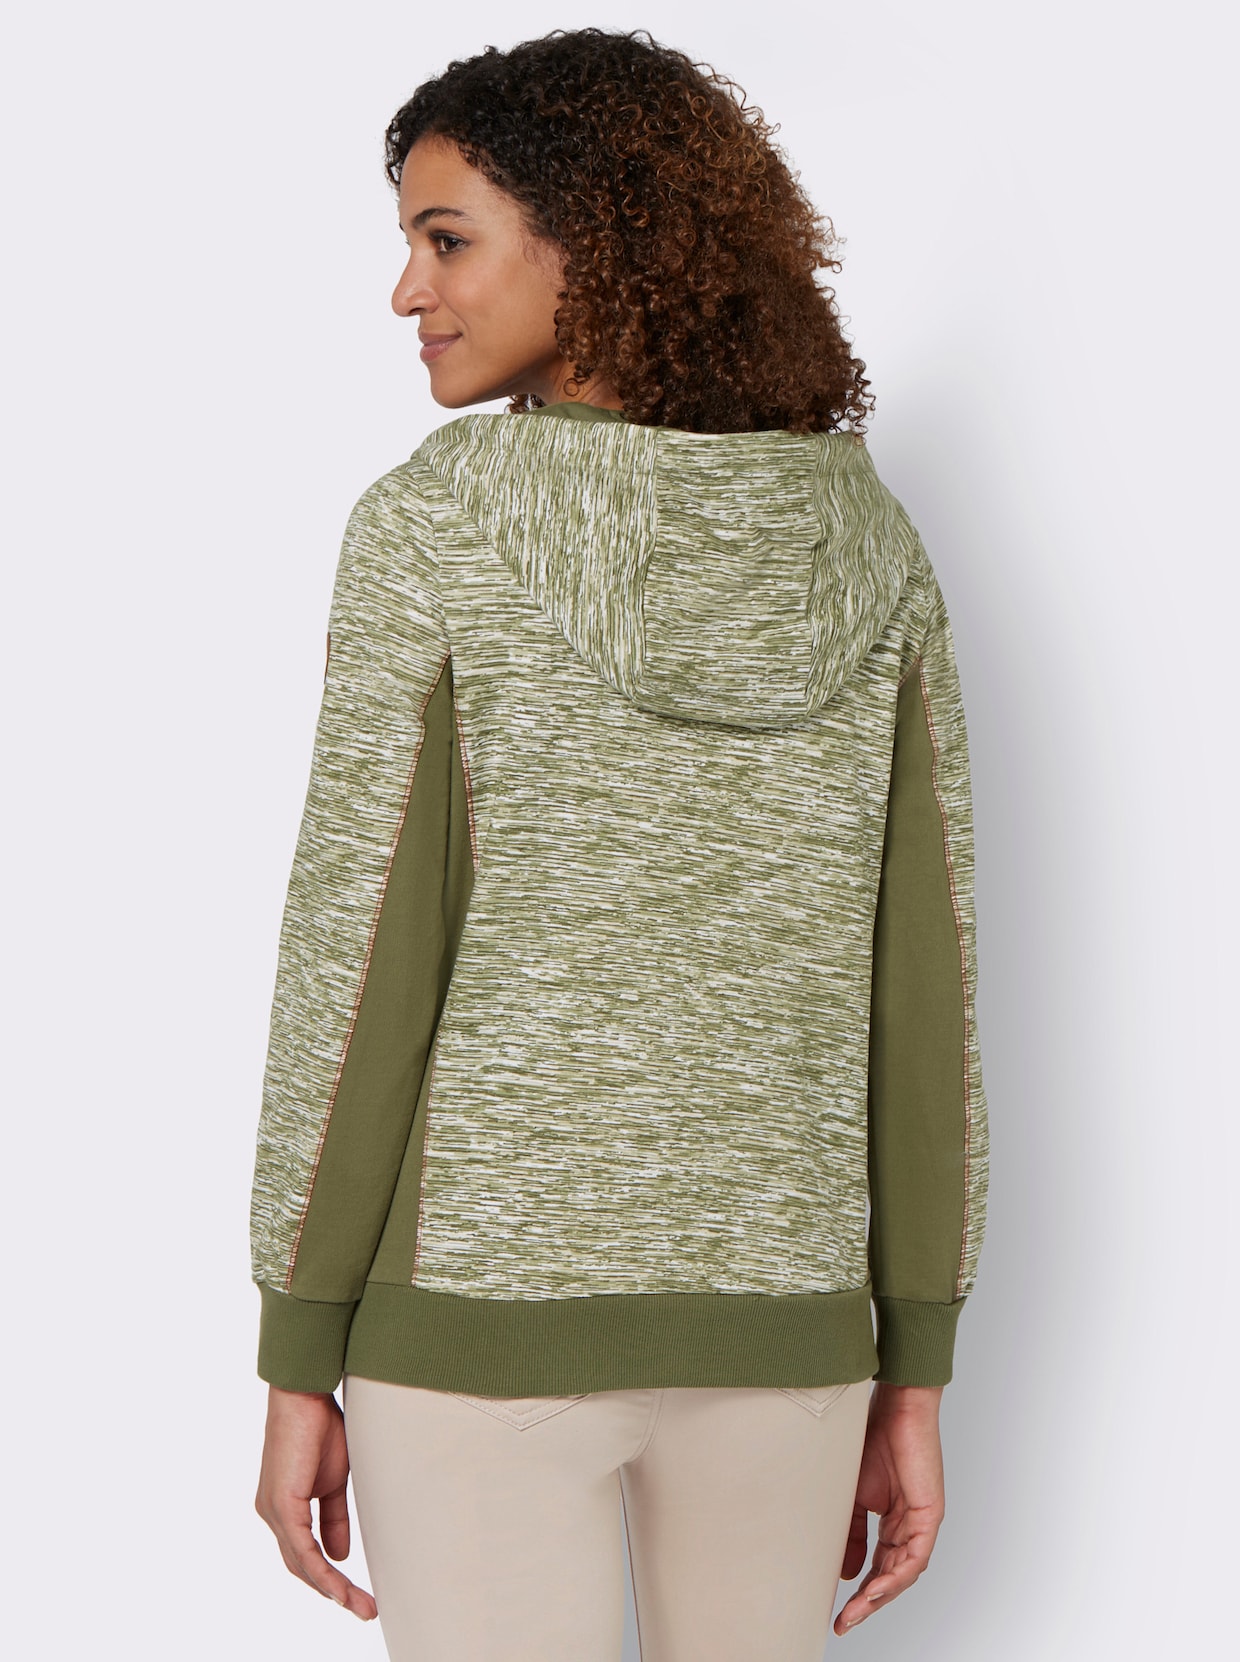 Shirtjacke - olive-weiss-meliert